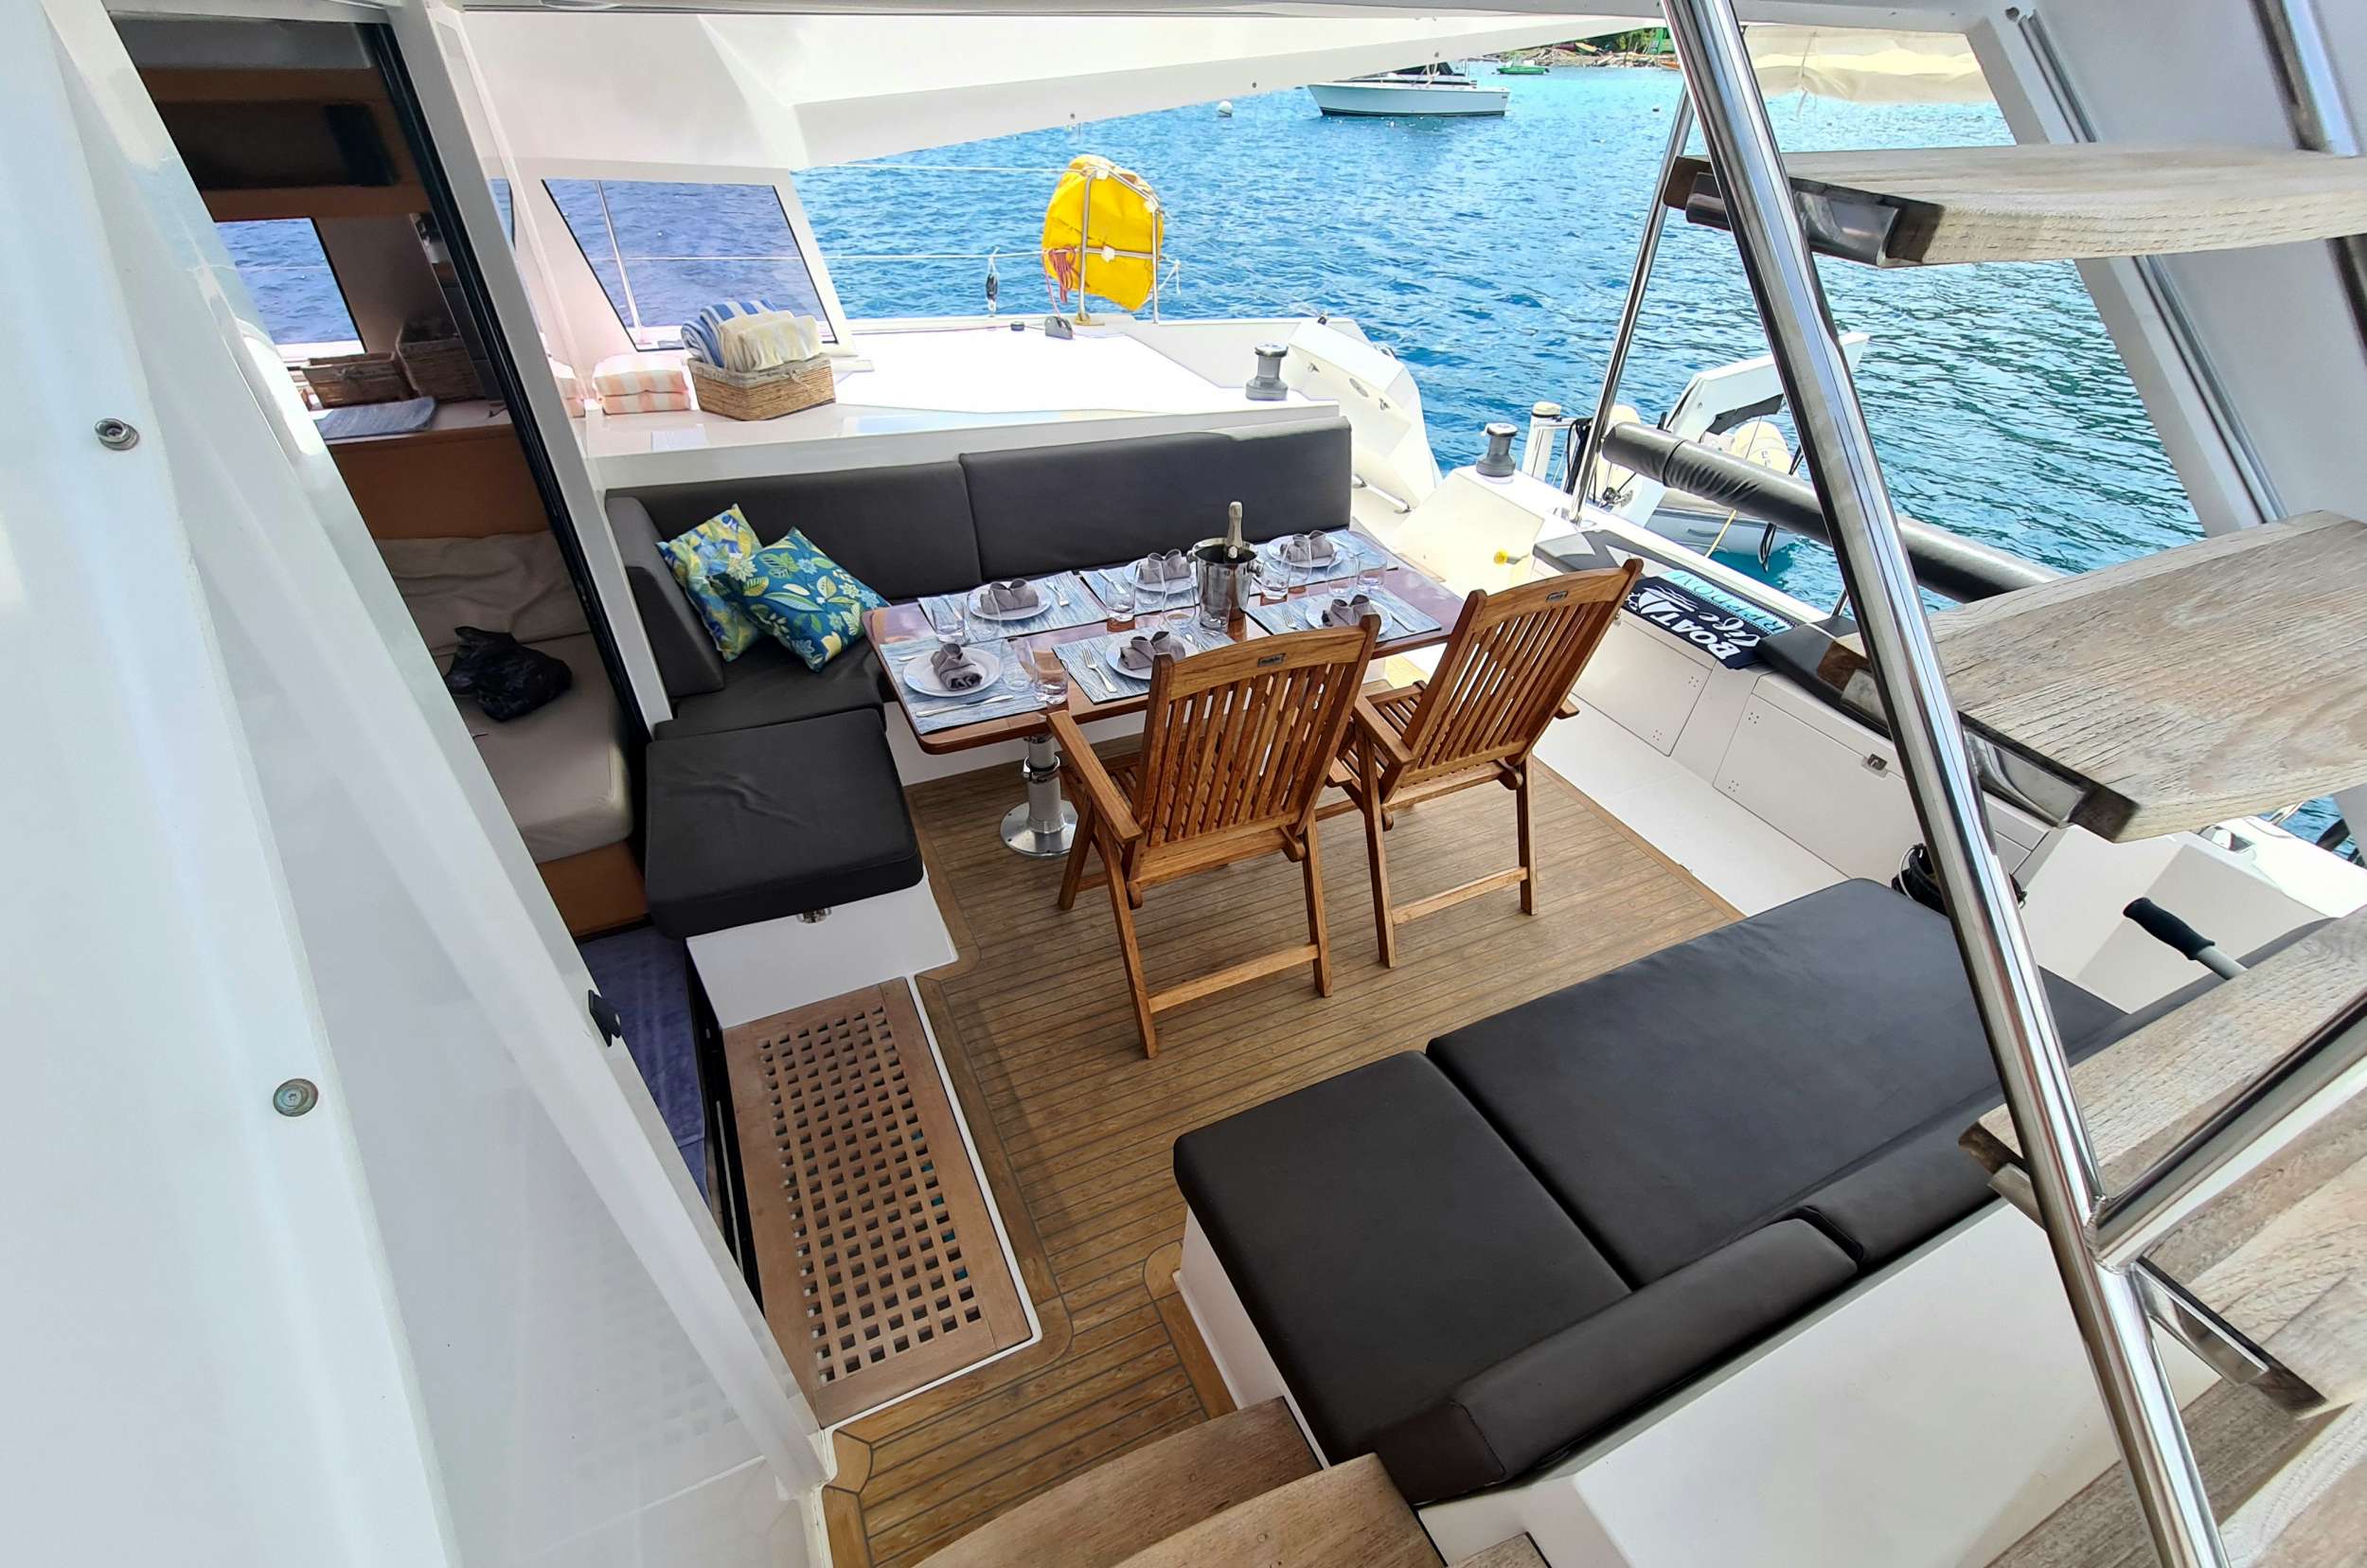 Freedom - Luxury yacht charter St Lucia & Boat hire in Caribbean 2